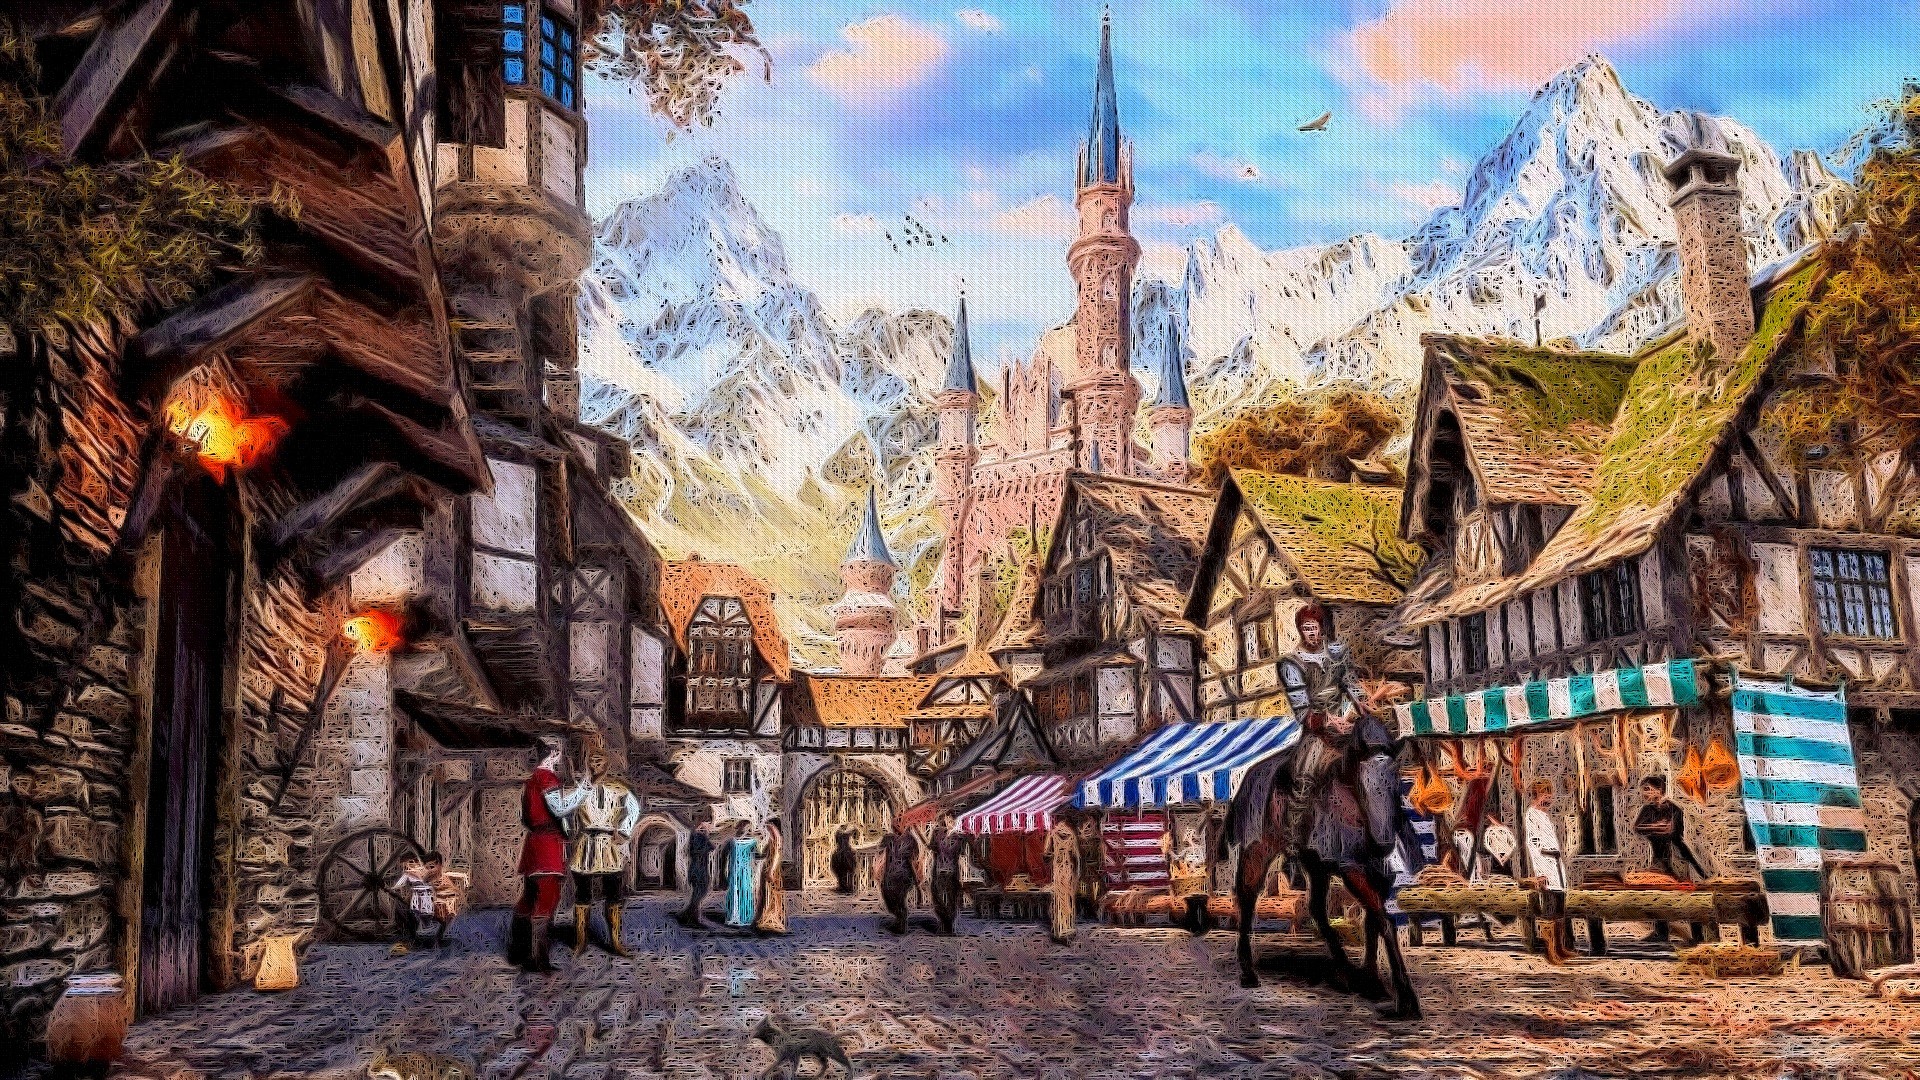 Outdoor Market in Mountain Town